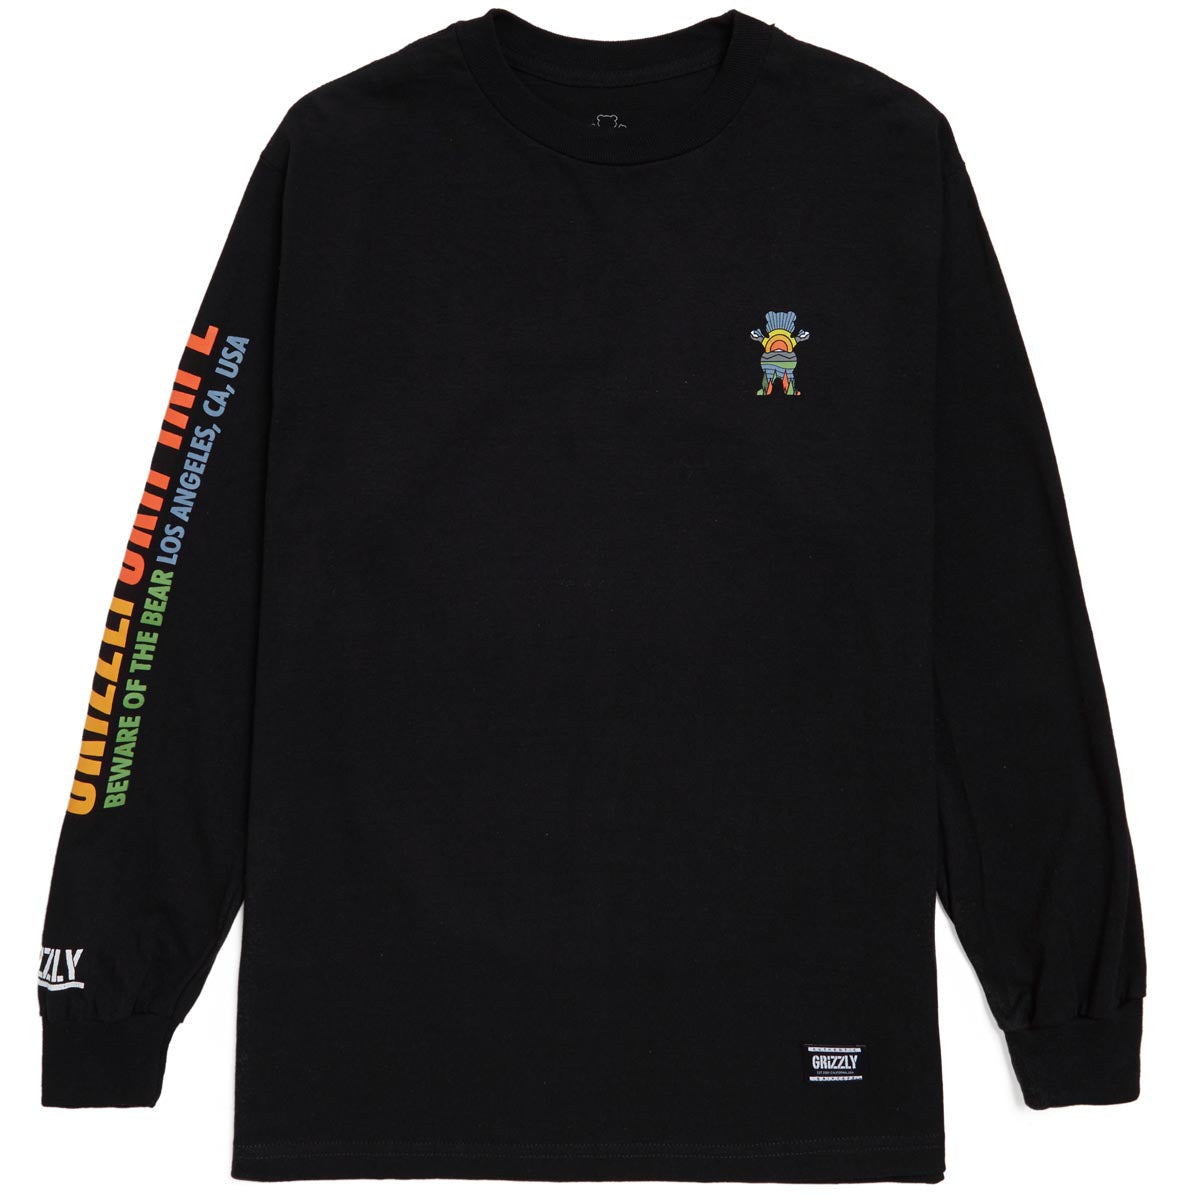 Grizzly Sun Valley Long Sleeve T-Shirt - Black image 2